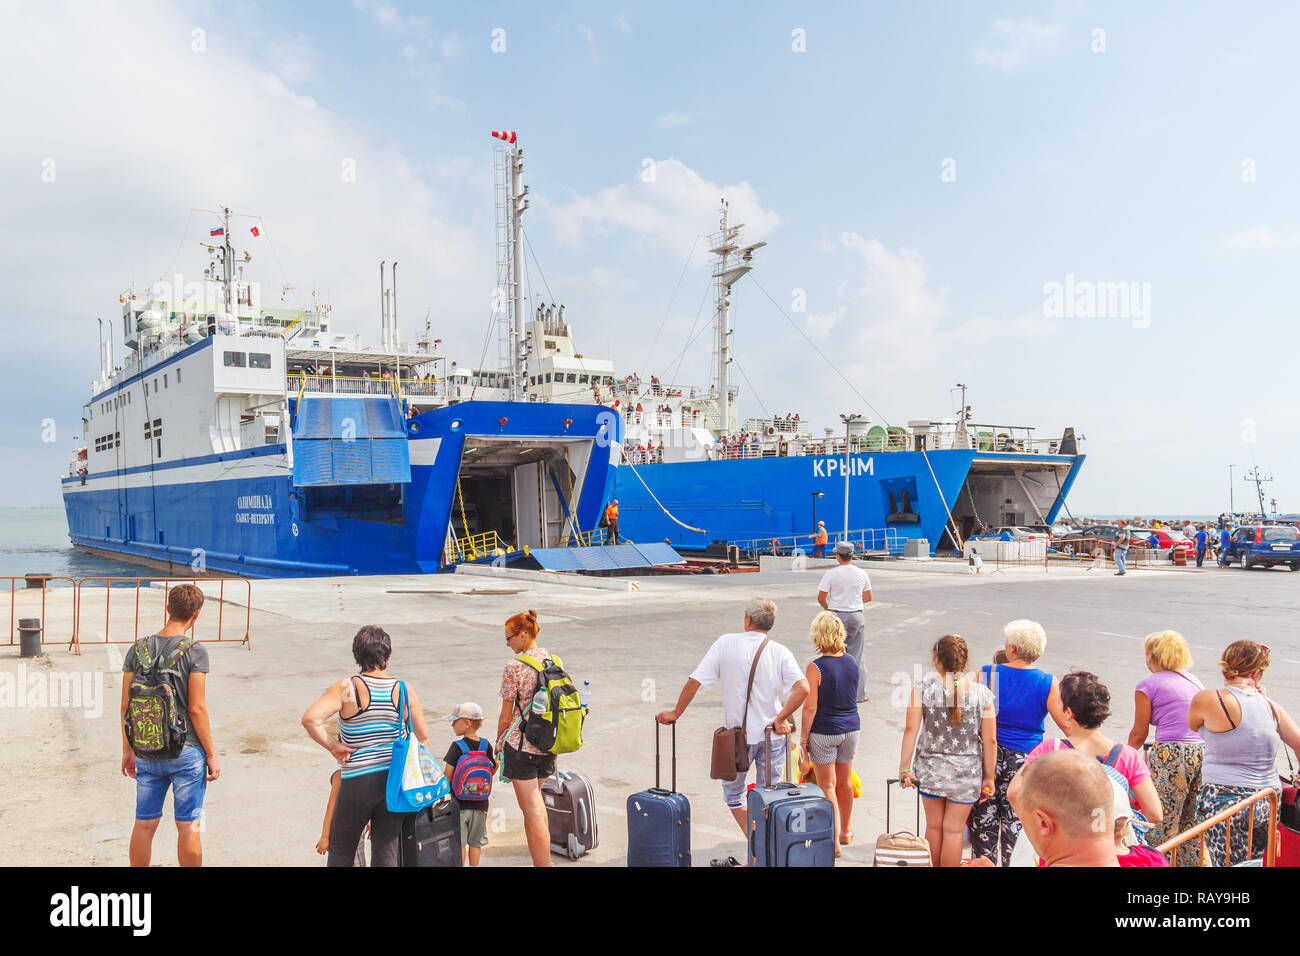 Waiting for the ferry at the port of Crimea, Russia Stock Photo